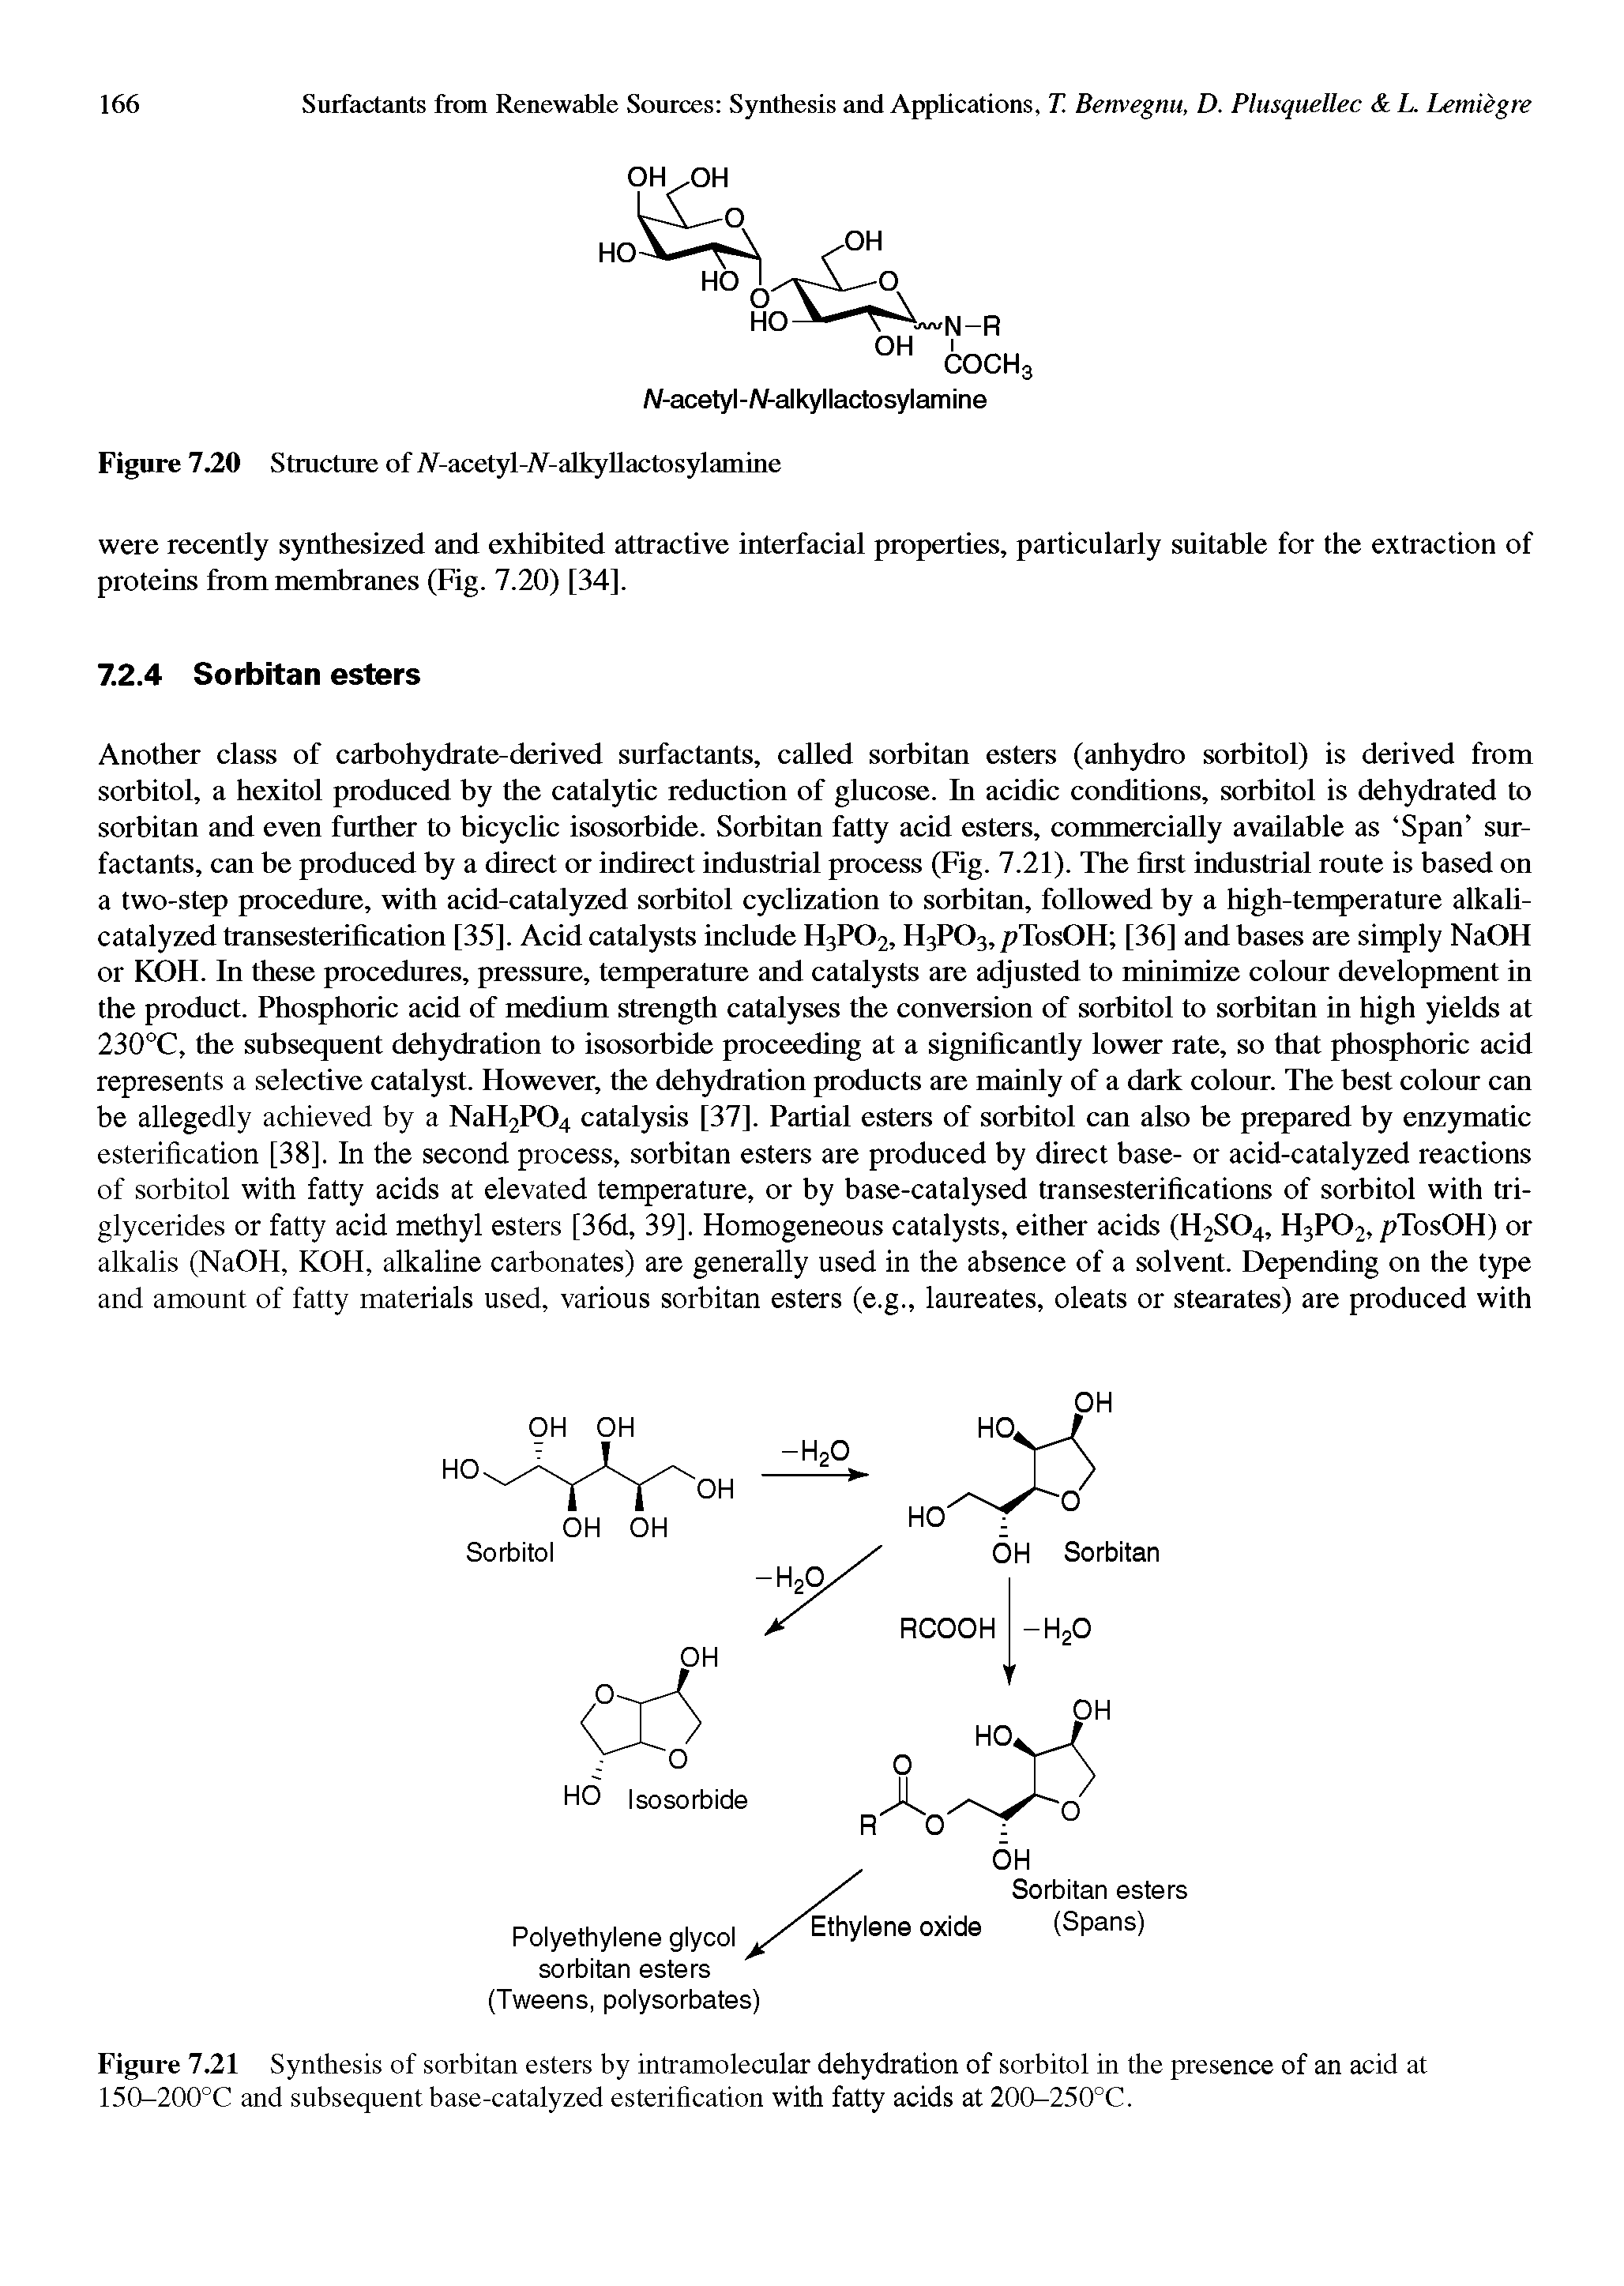 Figure 7.21 Synthesis of sorbitan esters by intramolecular dehydration of sorbitol in the presence of an acid at 150-200°C and subsequent base-catalyzed esterification with fatty acids at 200-250°C.